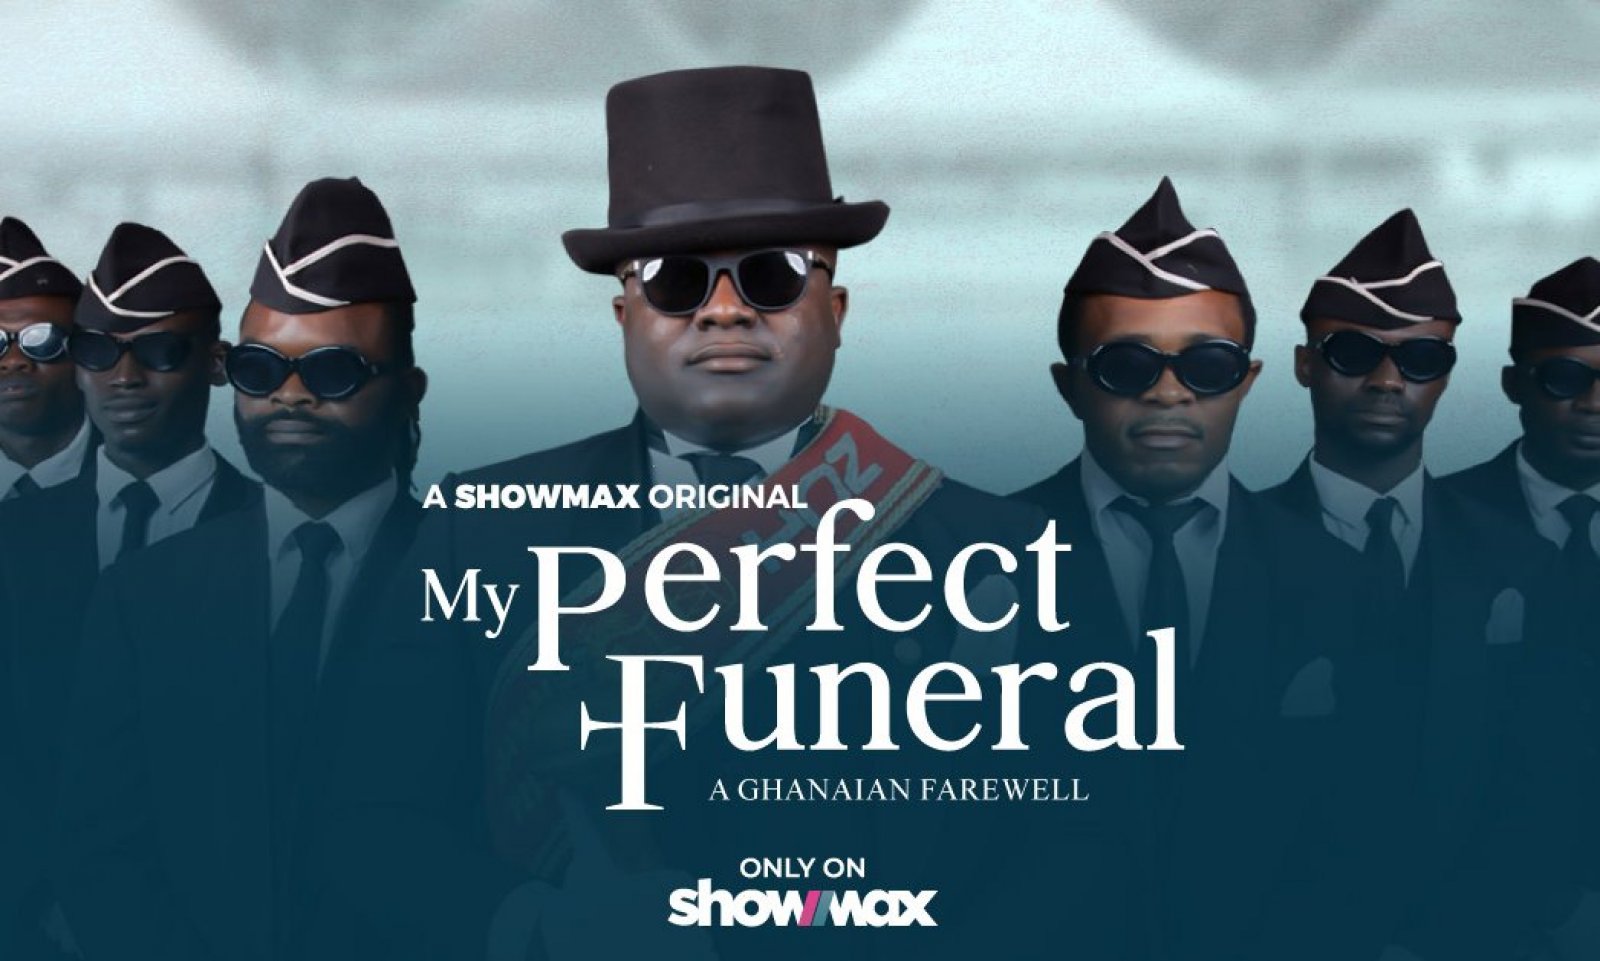 The Perfect Funeral | Variace kreativy